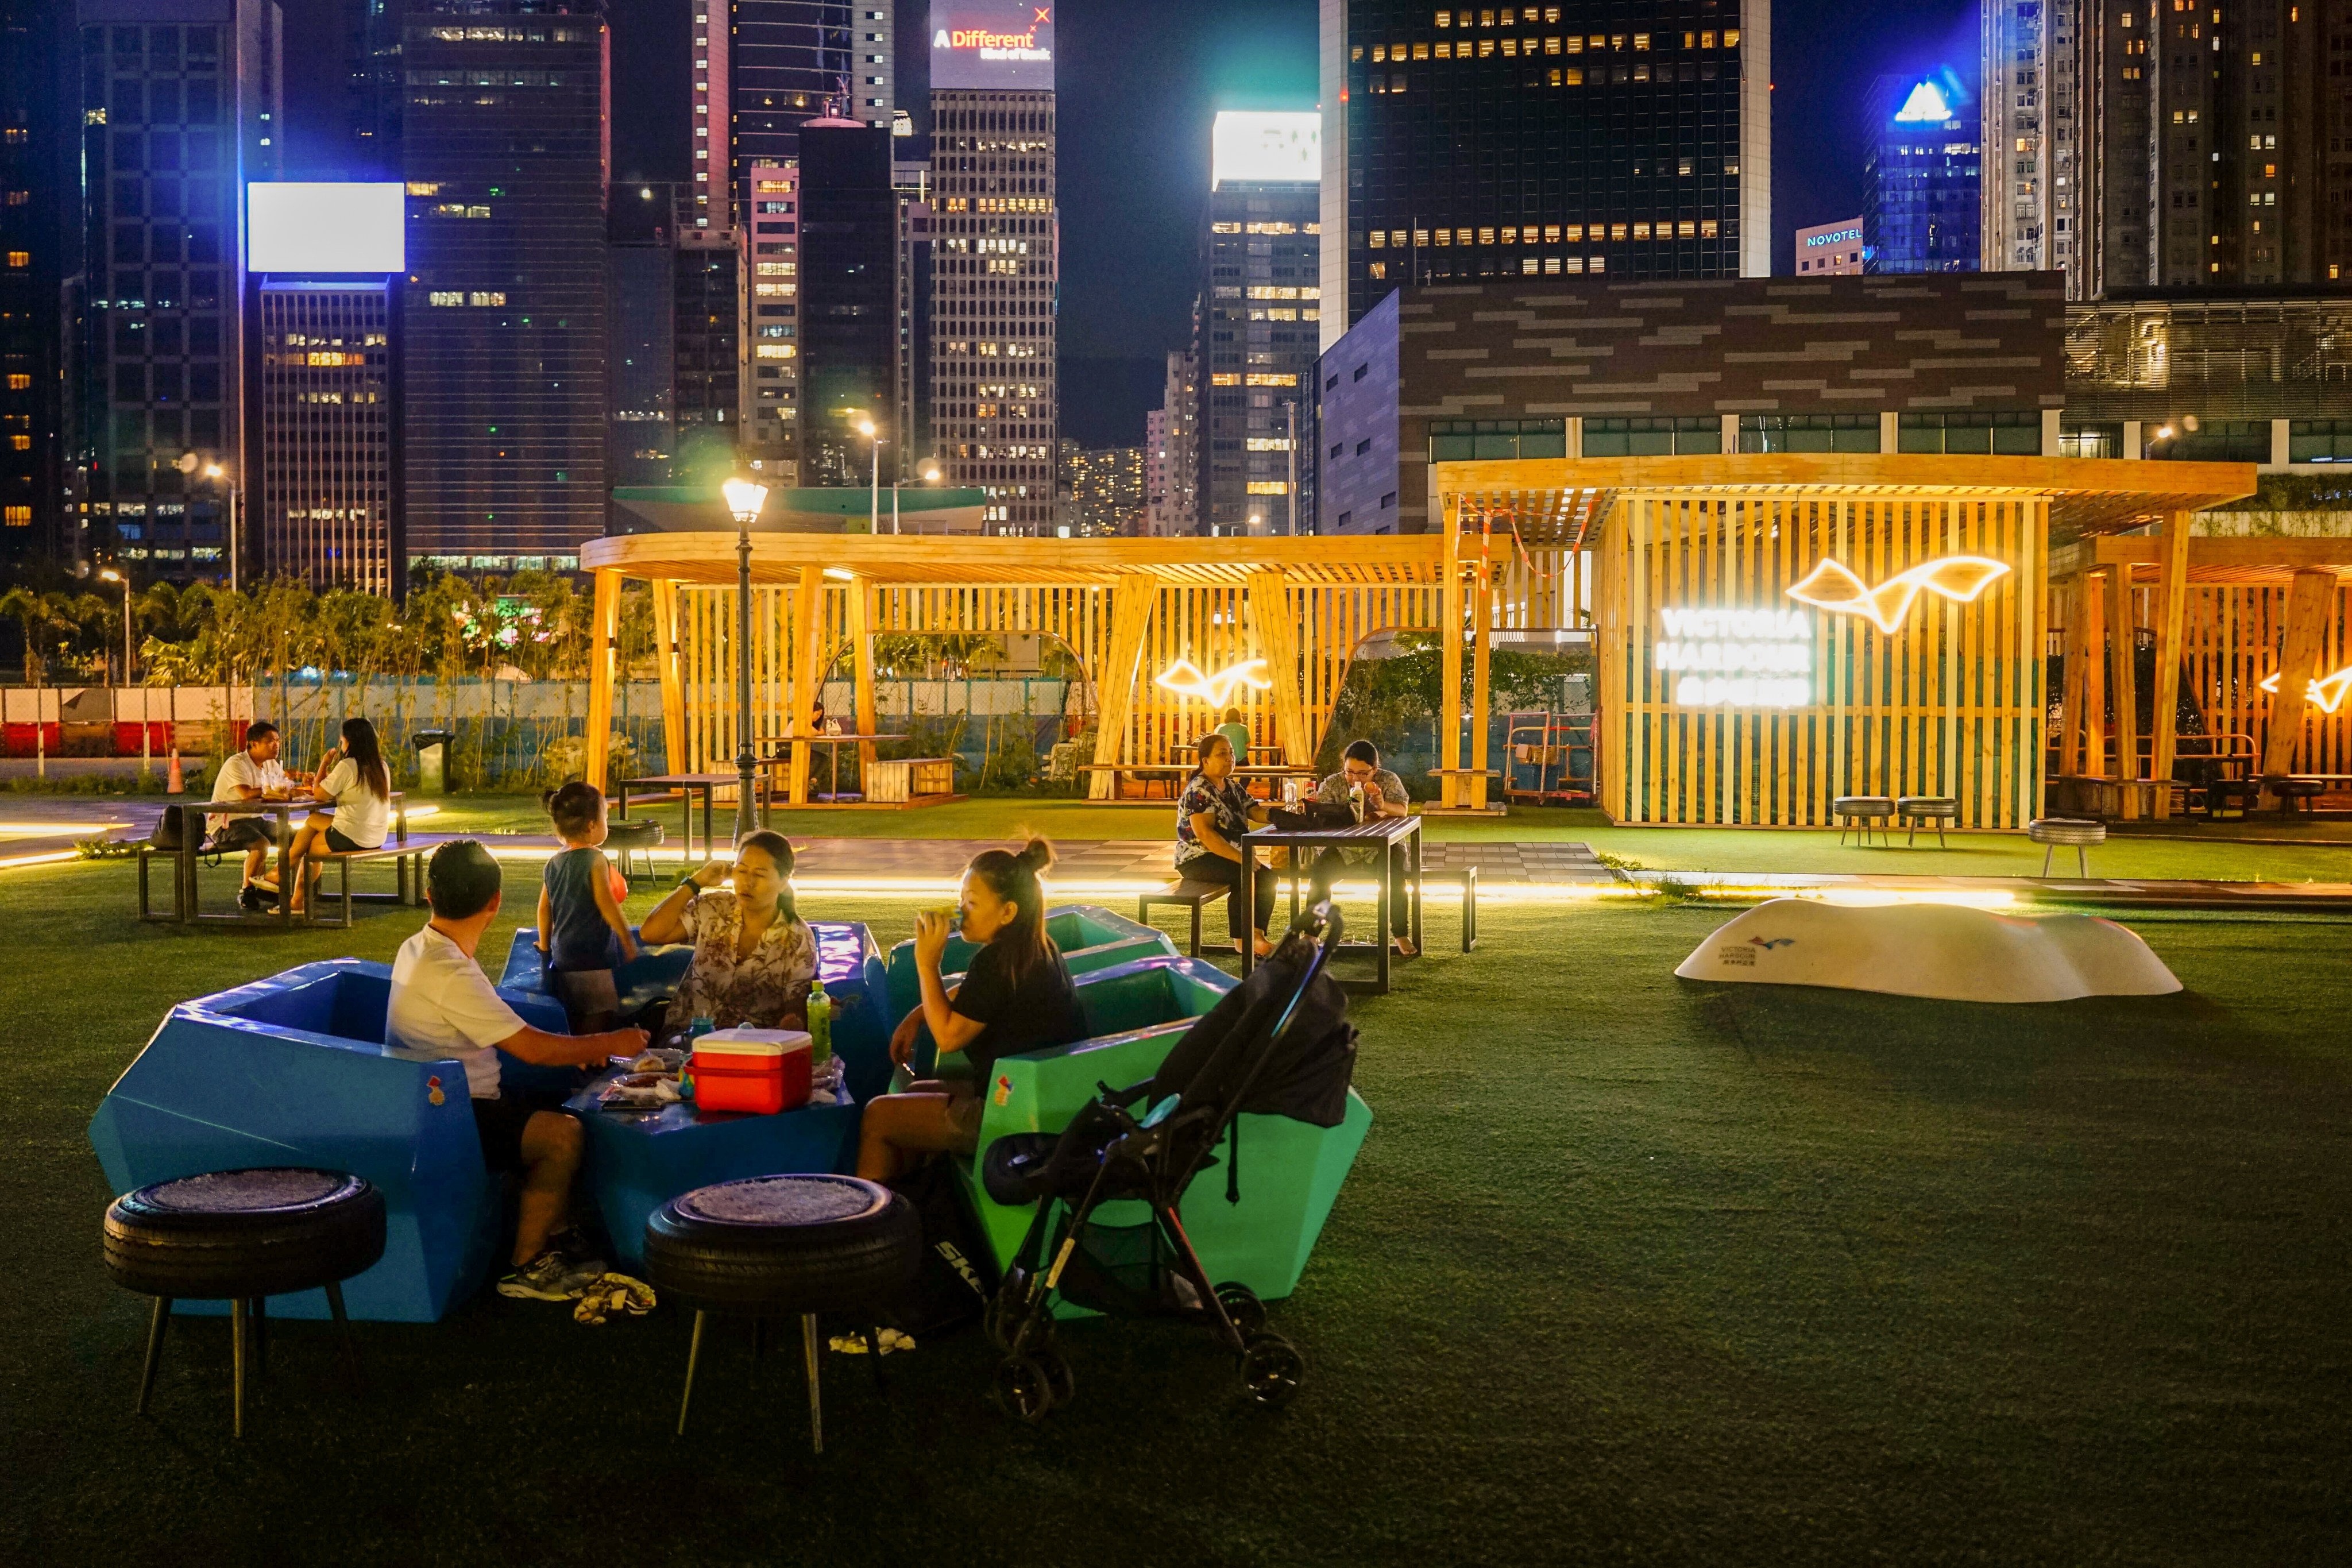 The campaign will feature a night bazaar on the Wan Chai promenade at Victoria Harbour, according to an insider. Photo: Warton Li